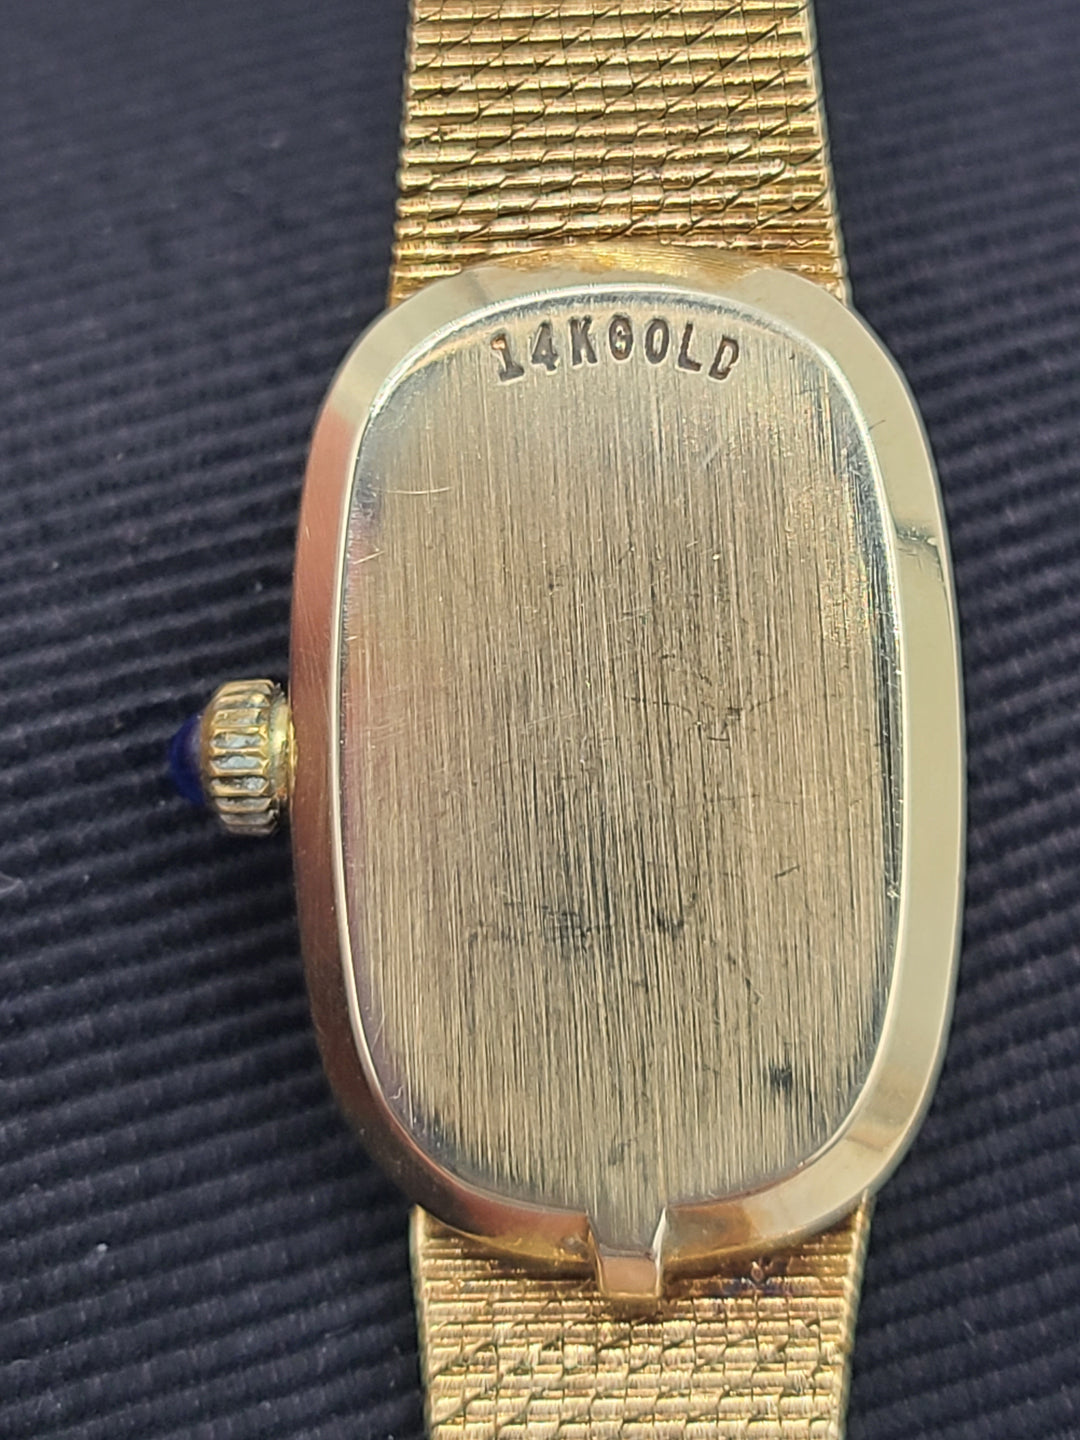 k740 Lovely Vintage Solid 14kt Yellow Gold Mechanical Movado Wristwatch